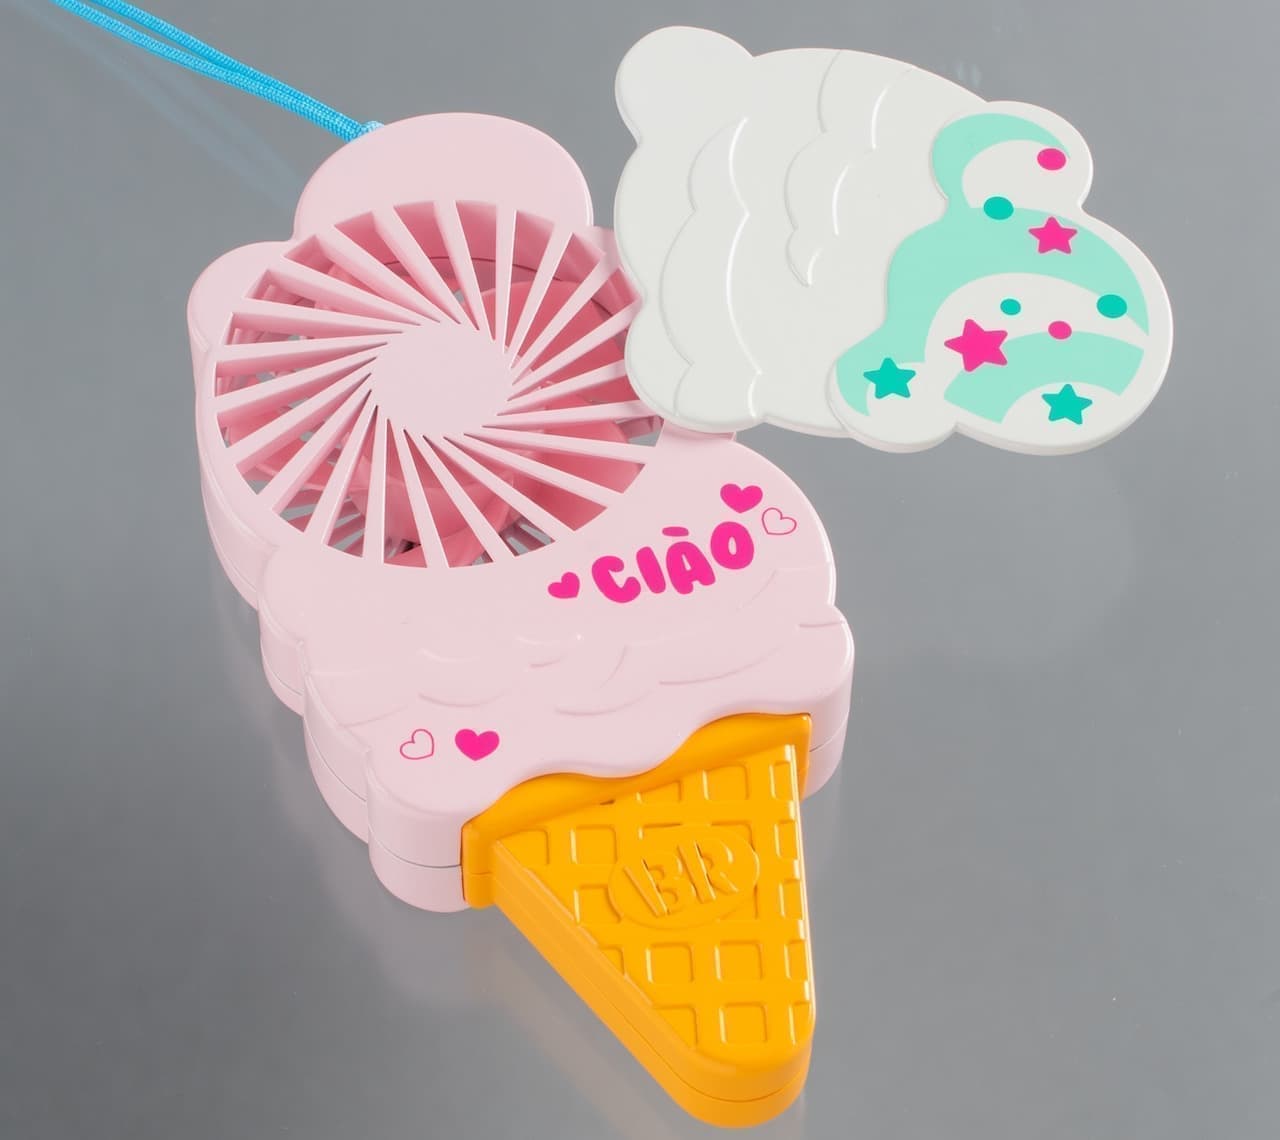 "Ciao" August issue Furoku is a collaboration fan with Thirty One Ice Cream